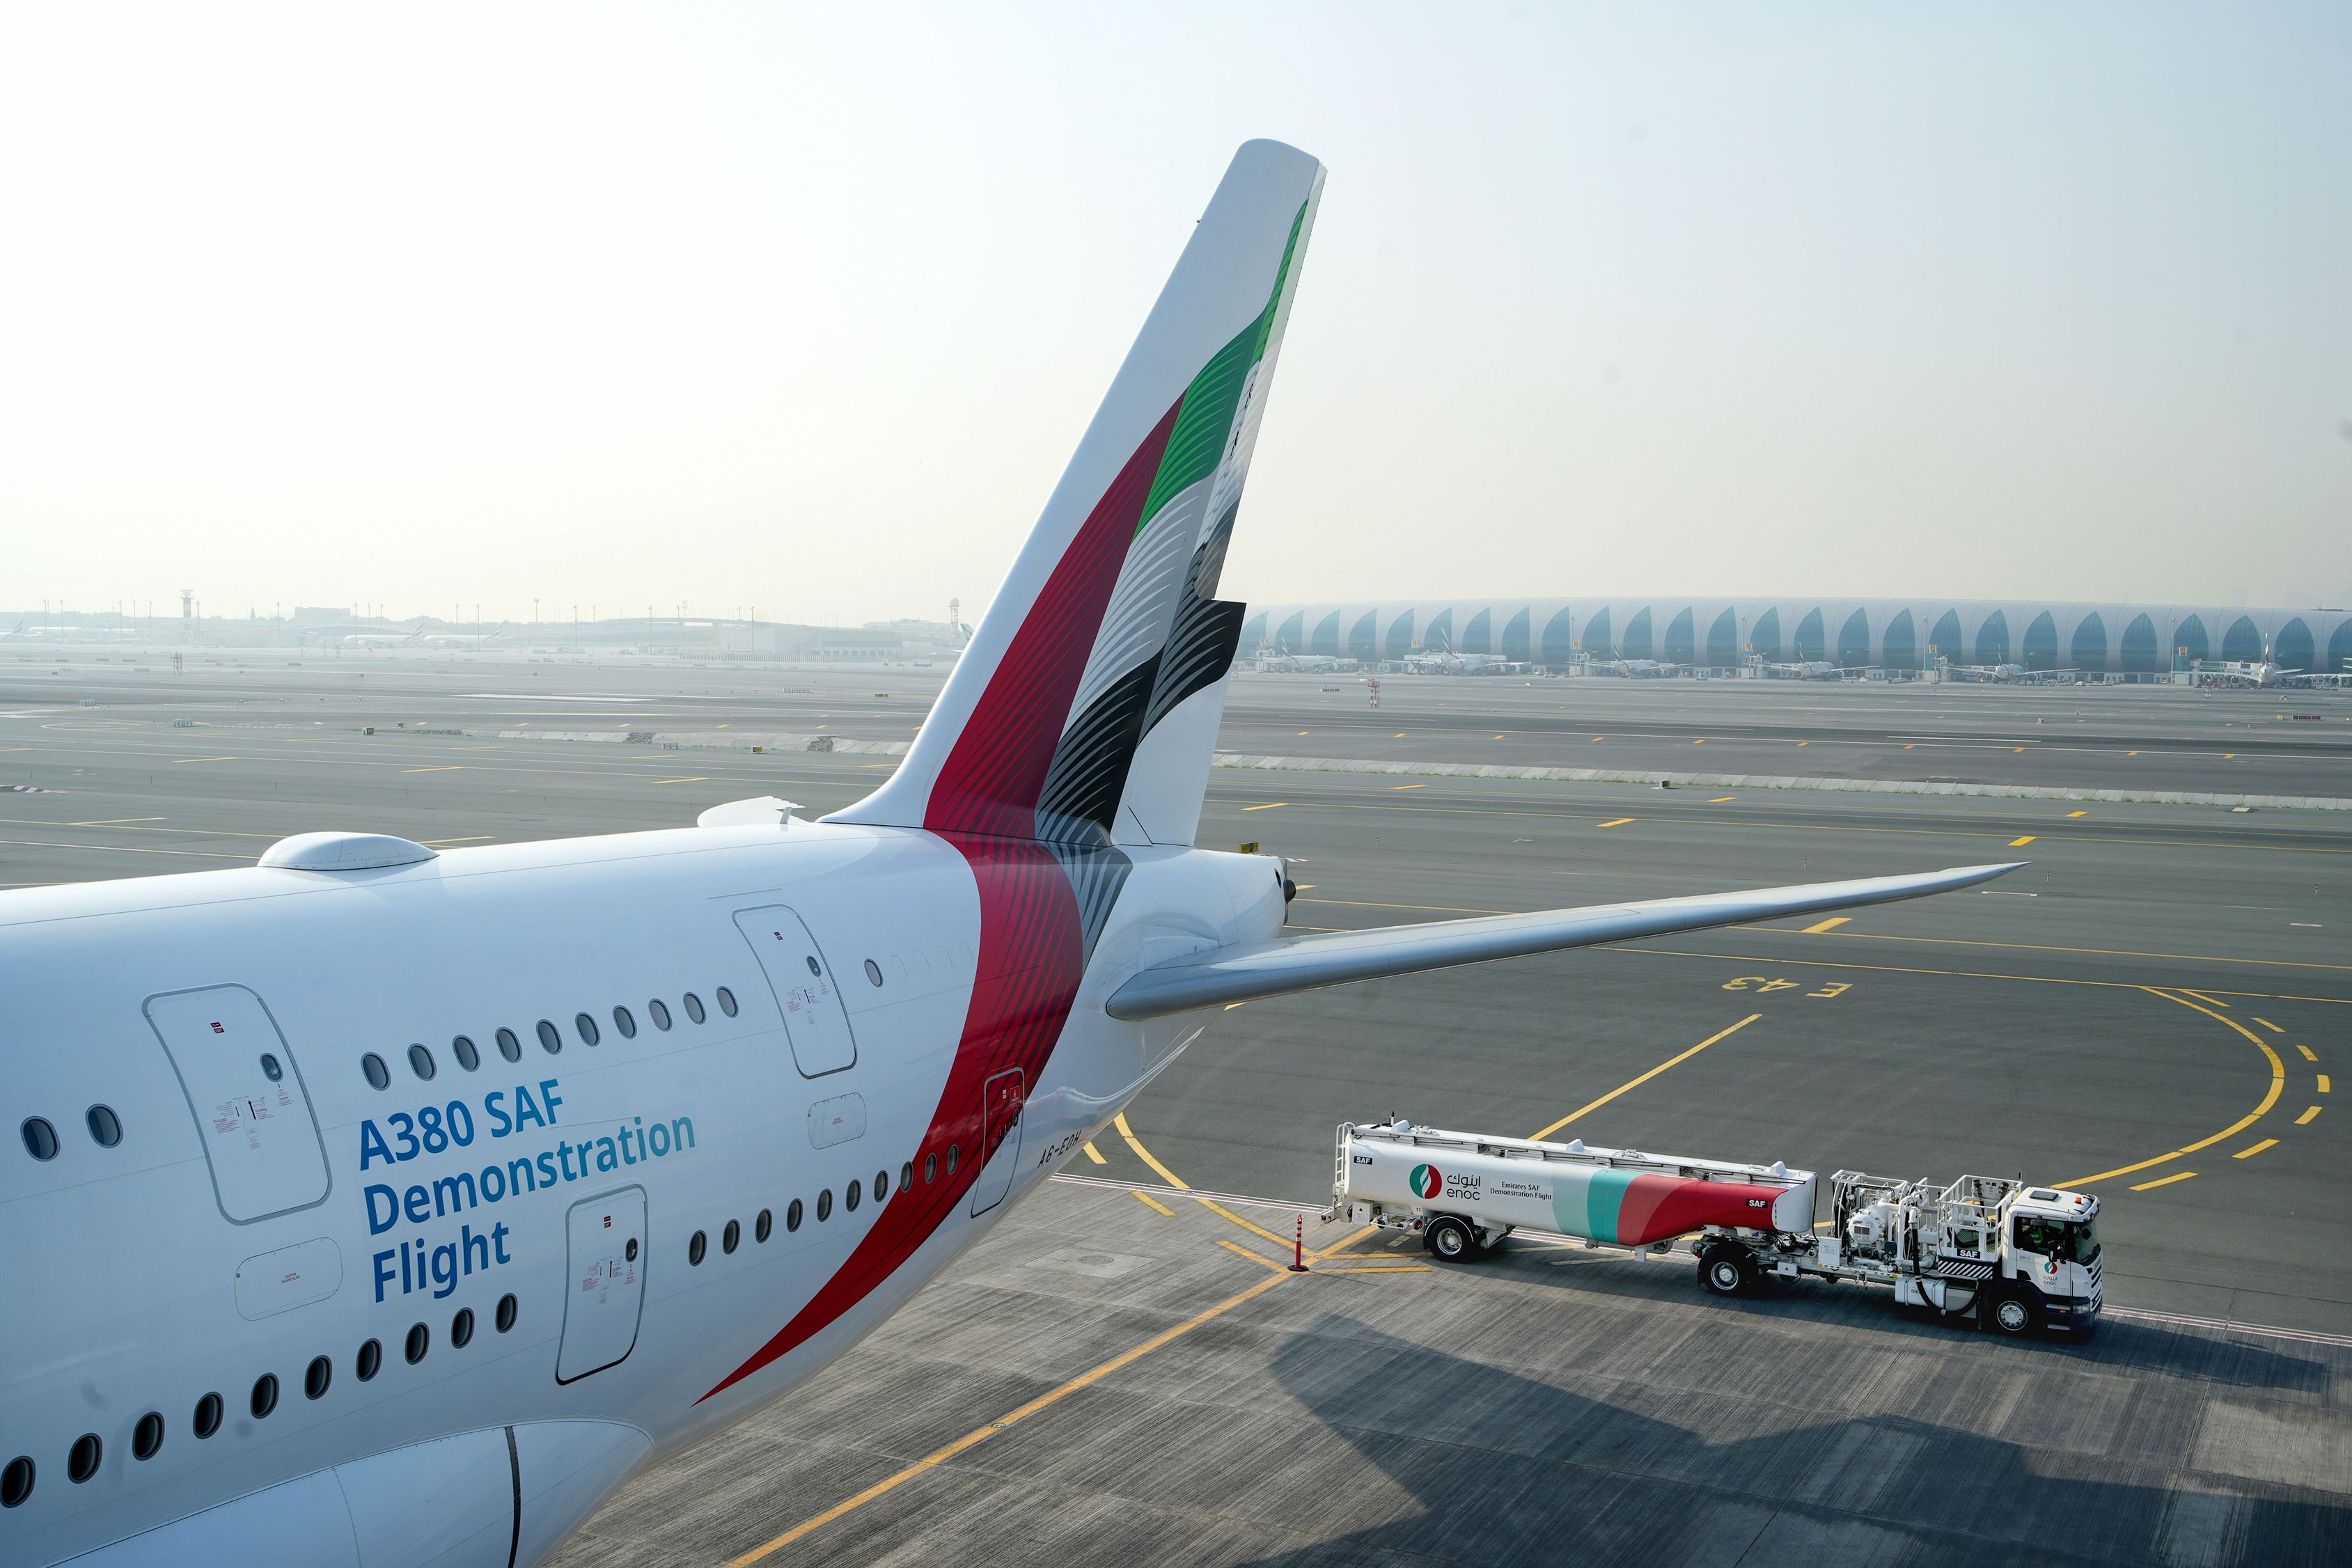 Emirates Airbus A380 and A380 SAF demonstration flight stickers